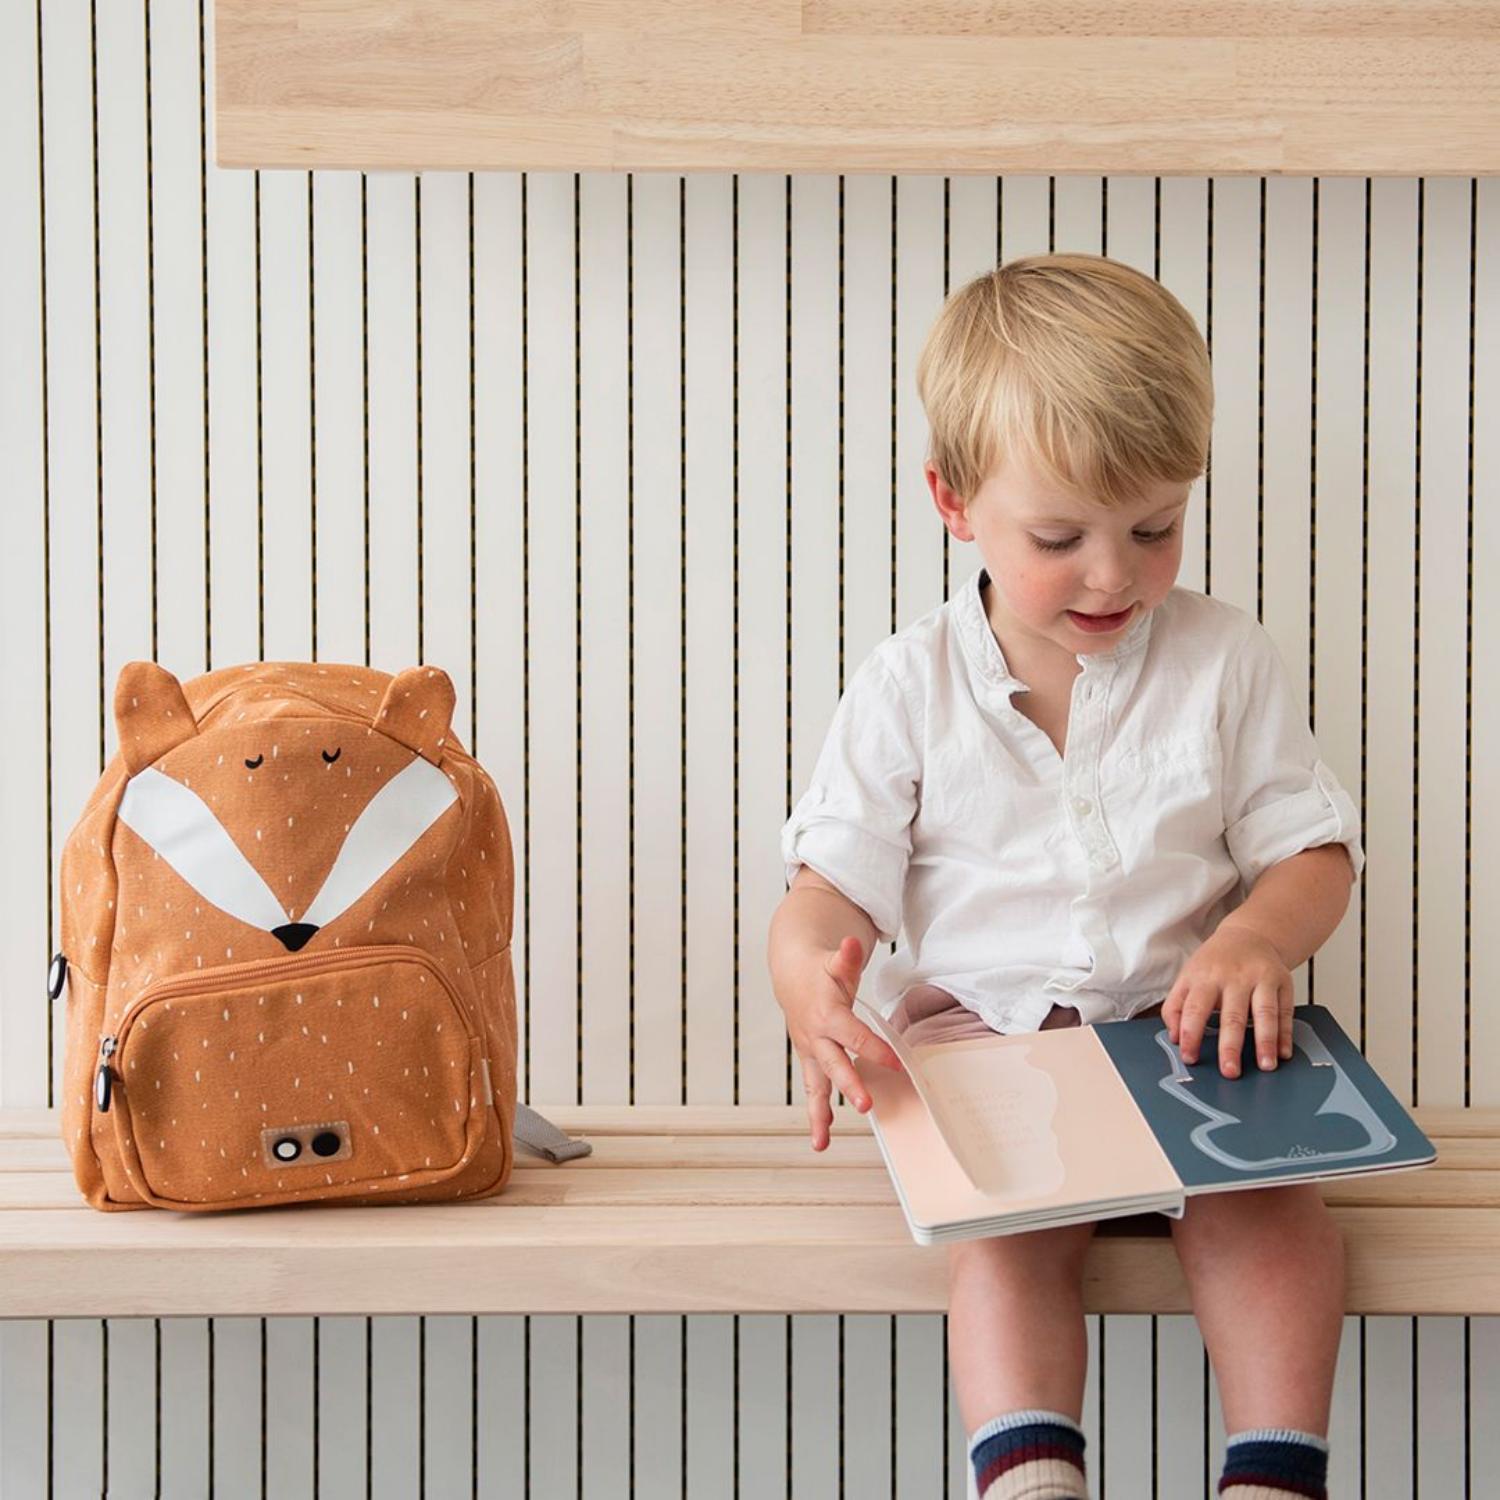 Trixie Mr. Fox Backpack | Kid’s Backpack for Creche, Nursery & School | Lifestyle: Boy Sitting on Bench with Backpack | BeoVERDE.ie